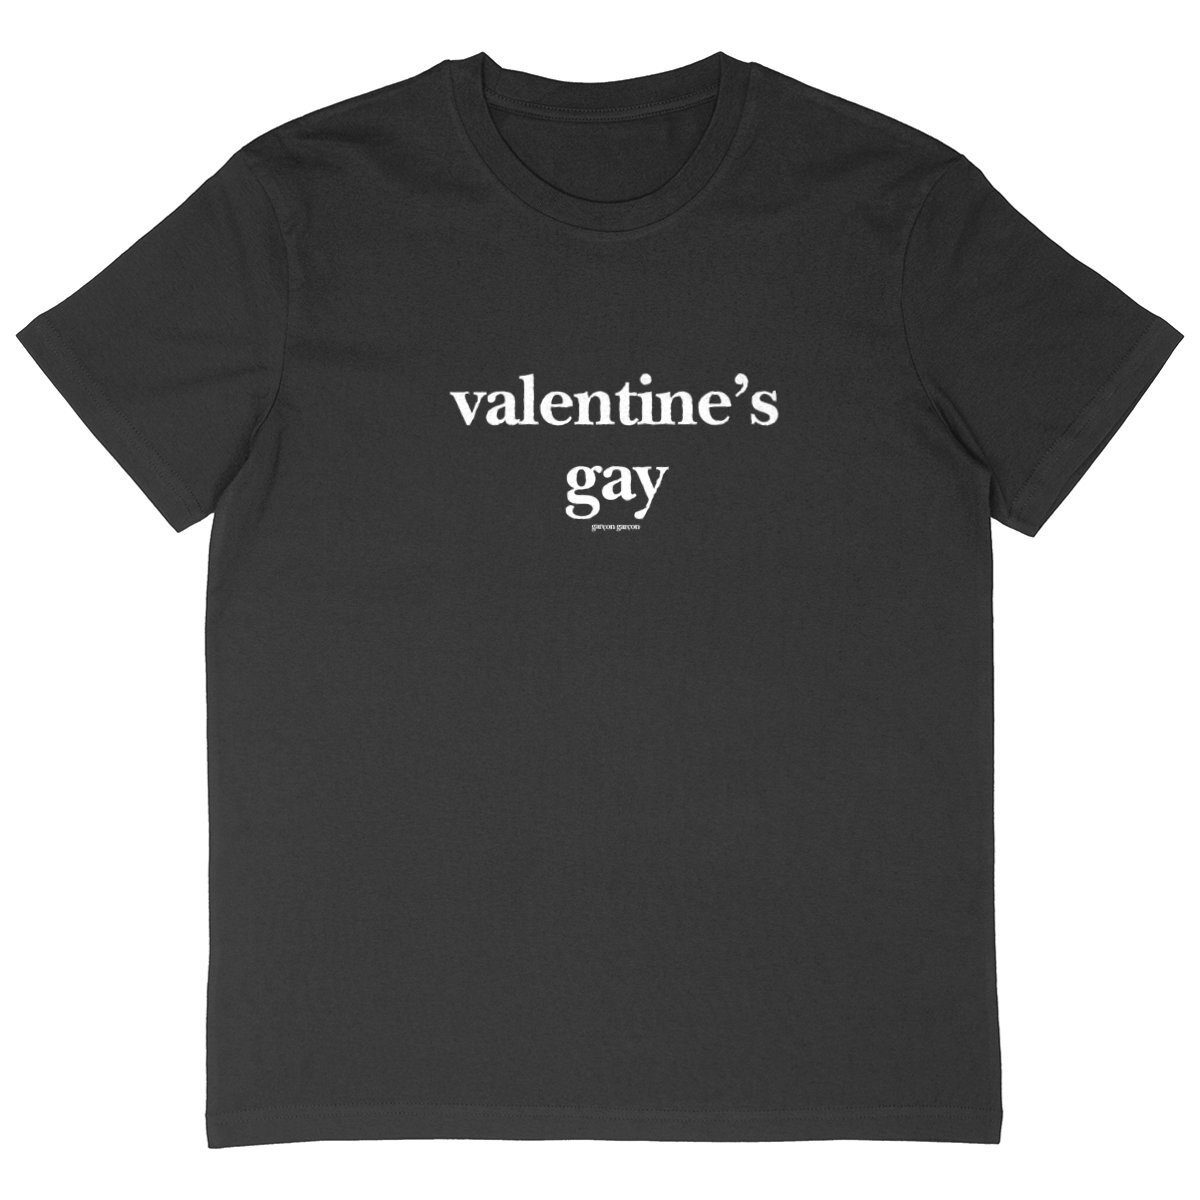 valentine's gay tee oversized. garçon garçon tee oversize BLACK. Dive into the essence of Parisian cool with this oversized tee. The subtle 'garçon garçon' signature whispers a chic narrative, offering a slice of the city's famed elegance. Perfect for those who speak style with simplicity.